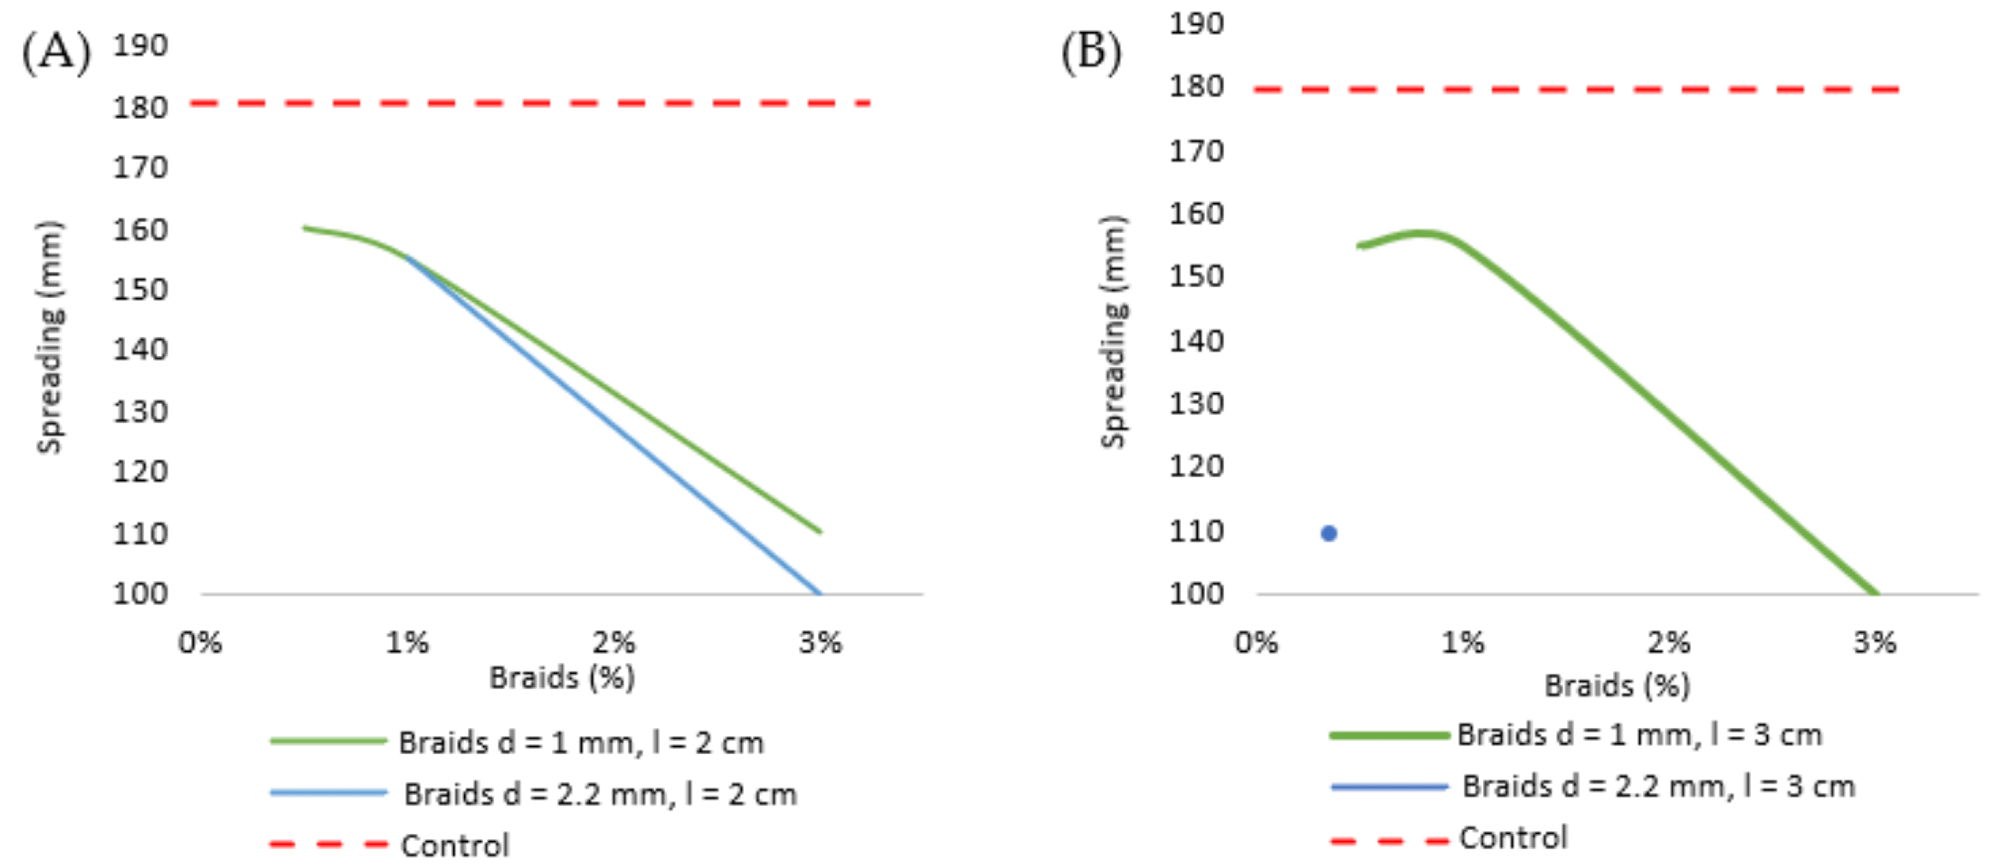 Workability curves for fibers with length of 20 mm (A) and 30 mm (B).